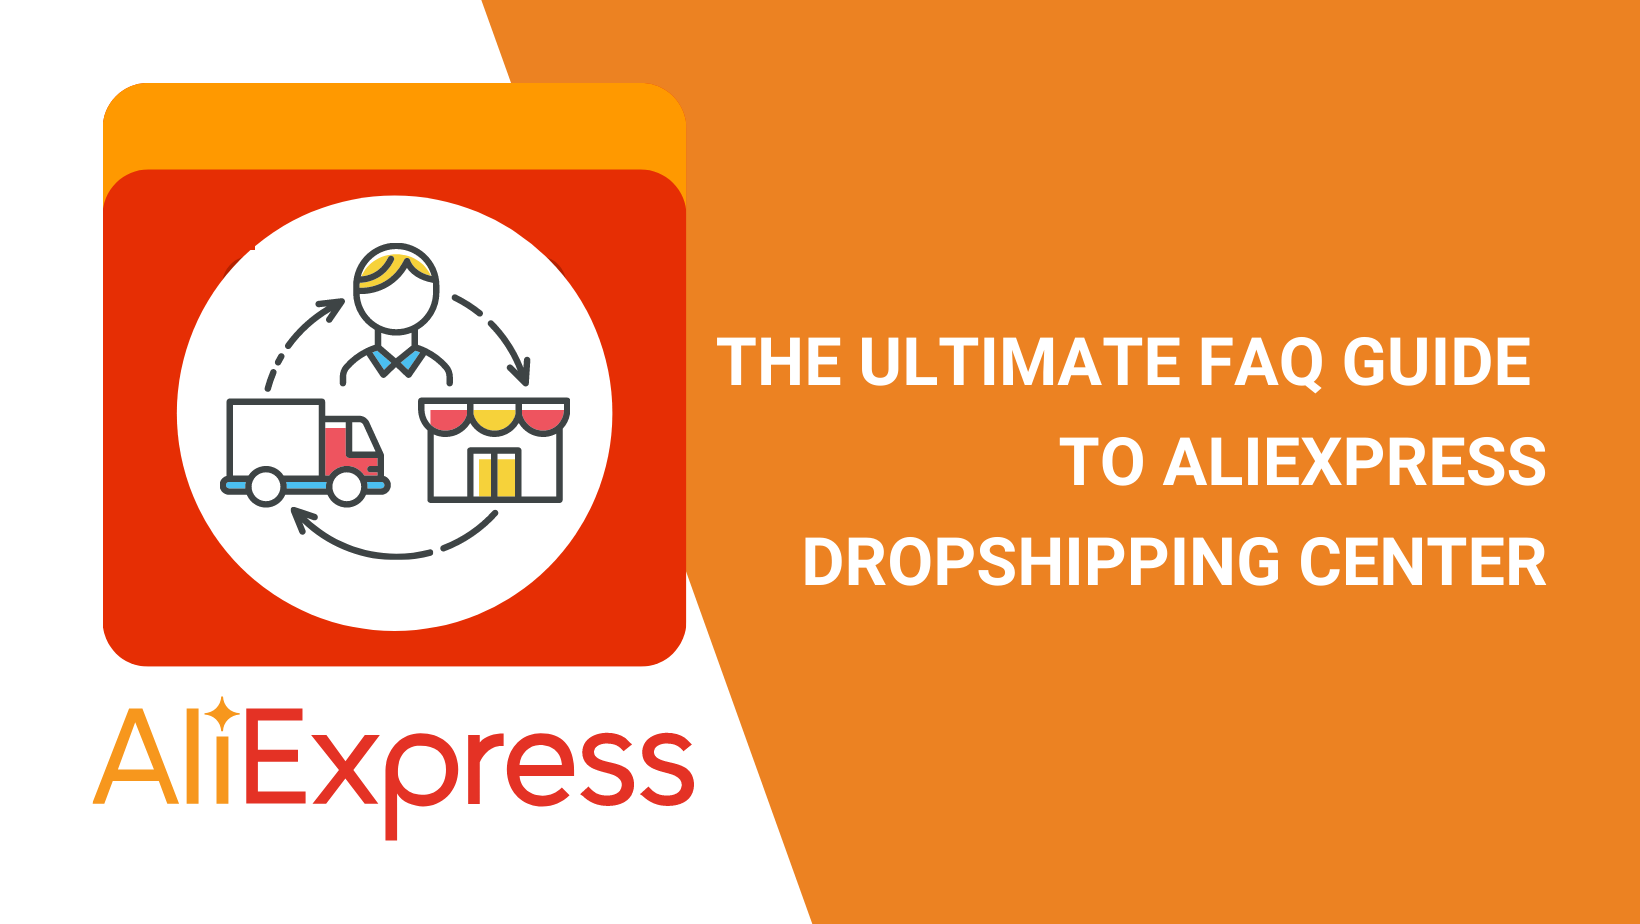 THE ULTIMATE FAQ GUIDE TO ALIEXPRESS DROPSHIPPING CENTER